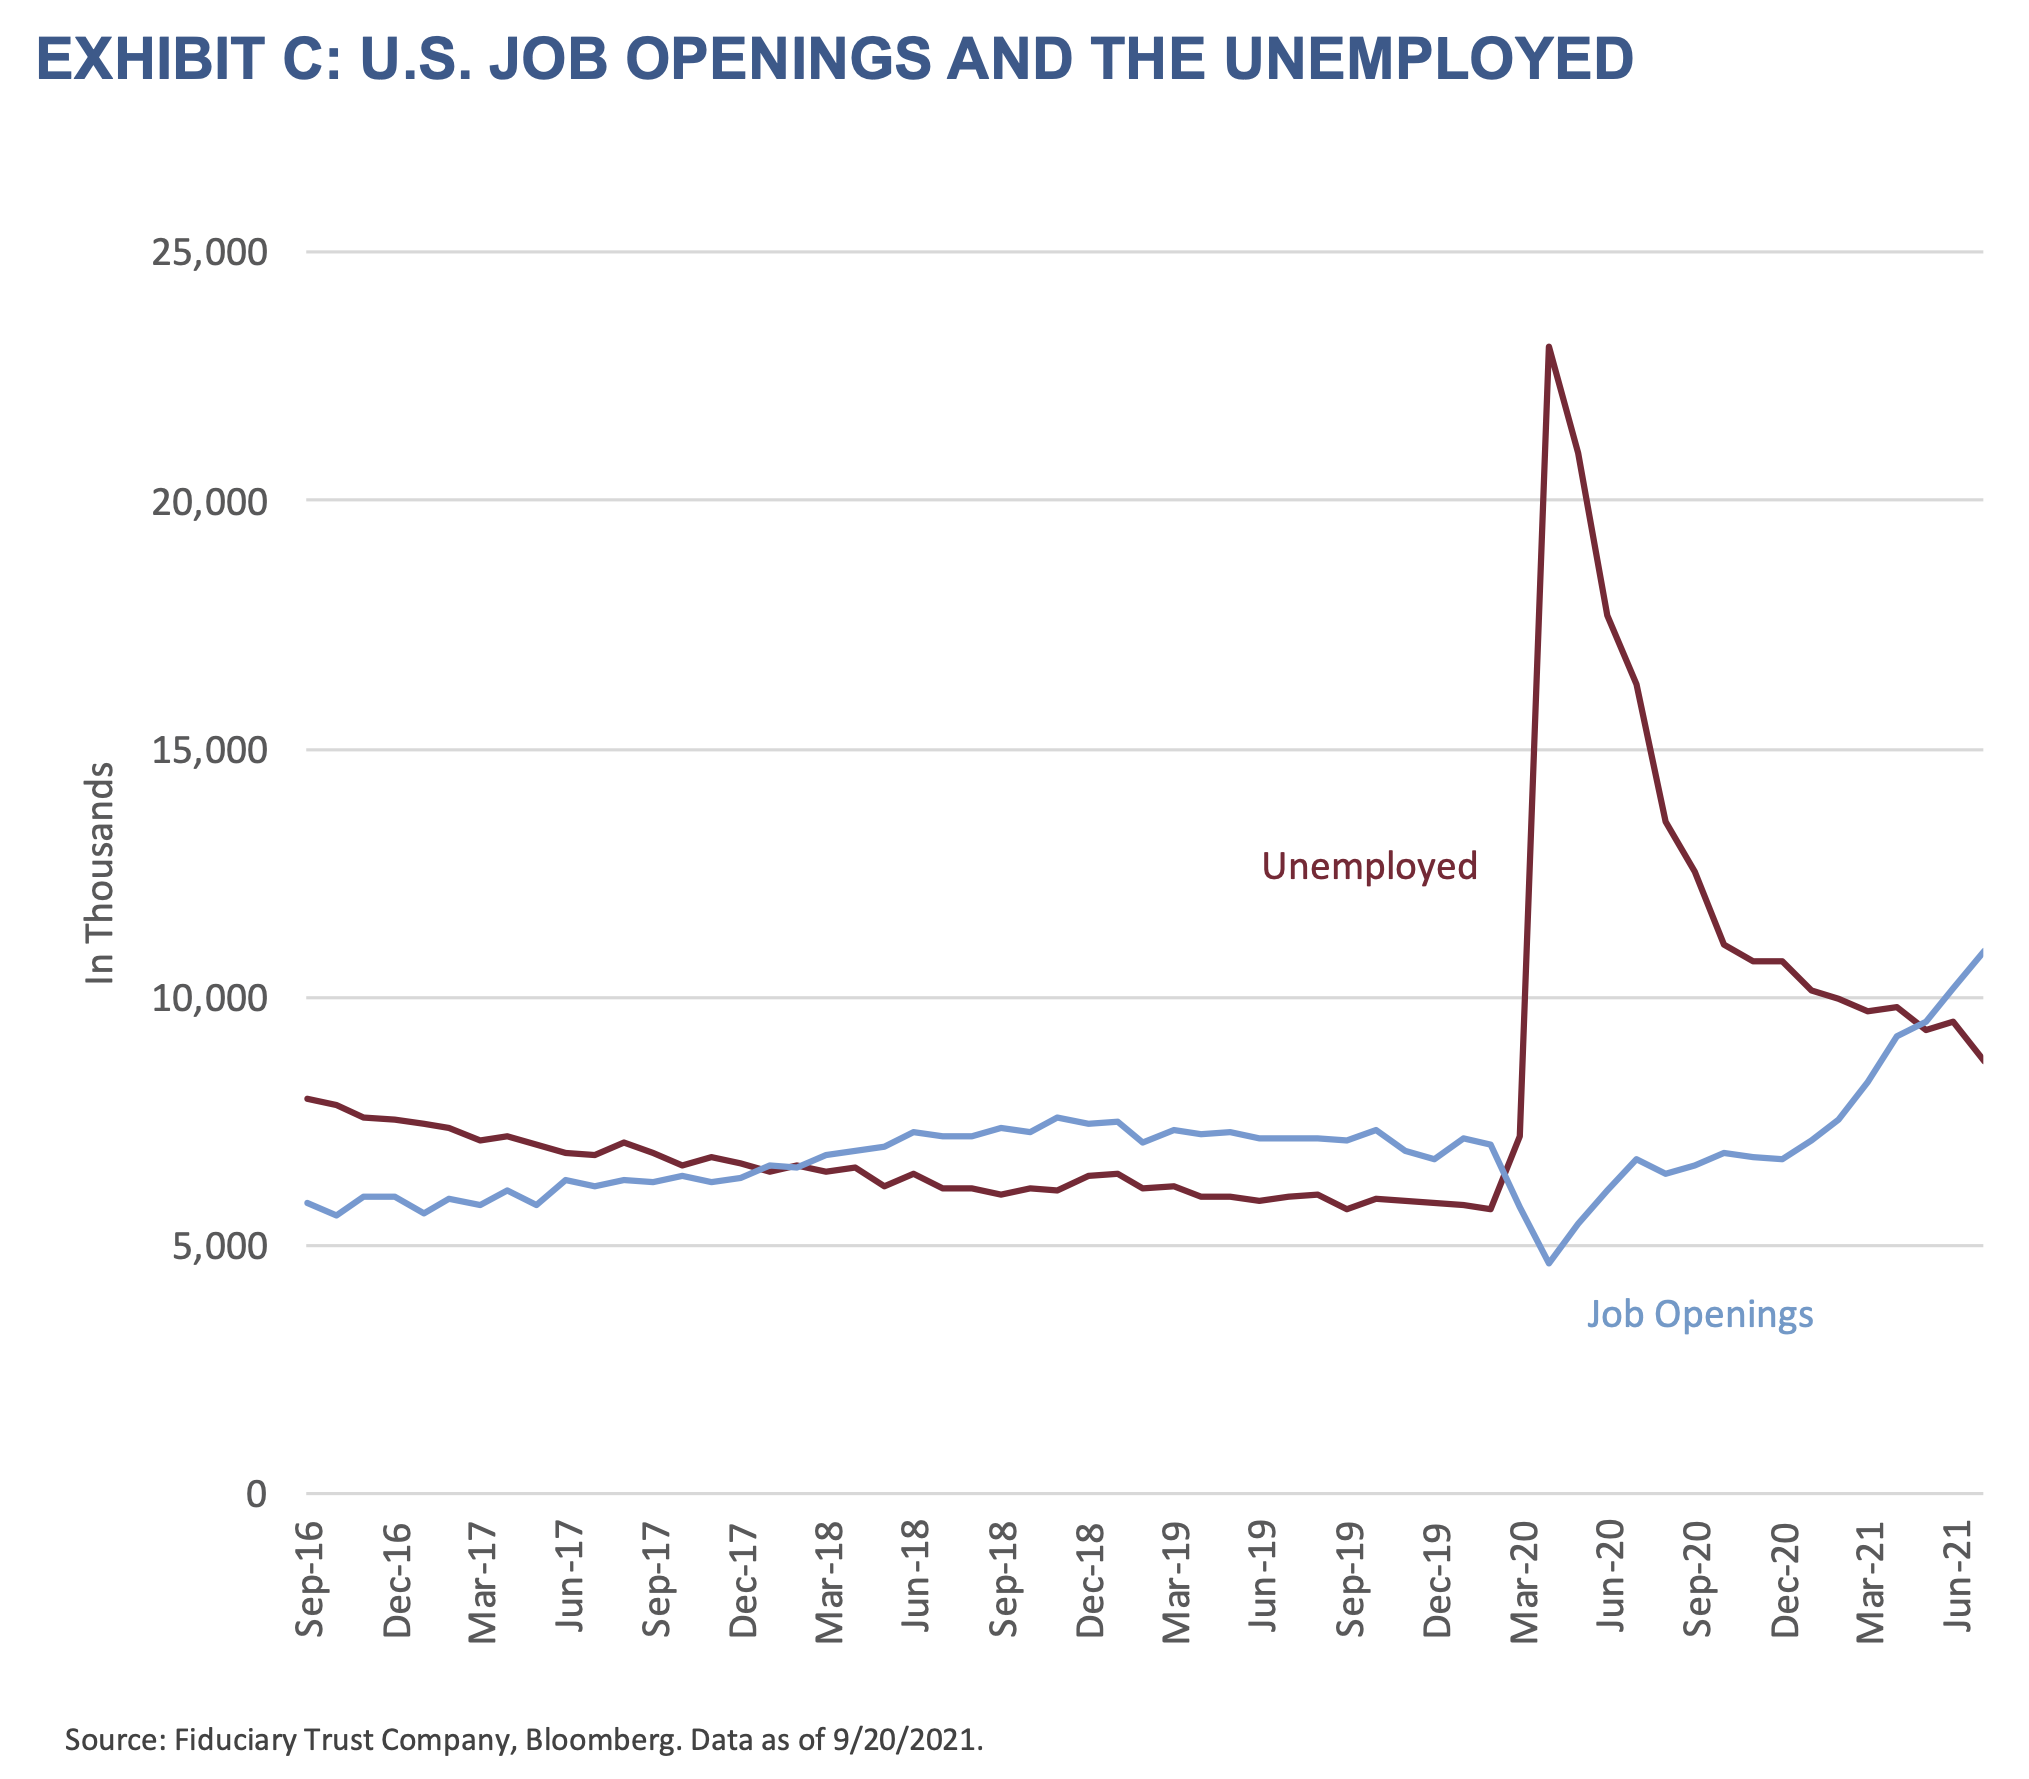 2021 Q4 Outlook - Exhibit C- U.S. Job Openings and the Unemployed